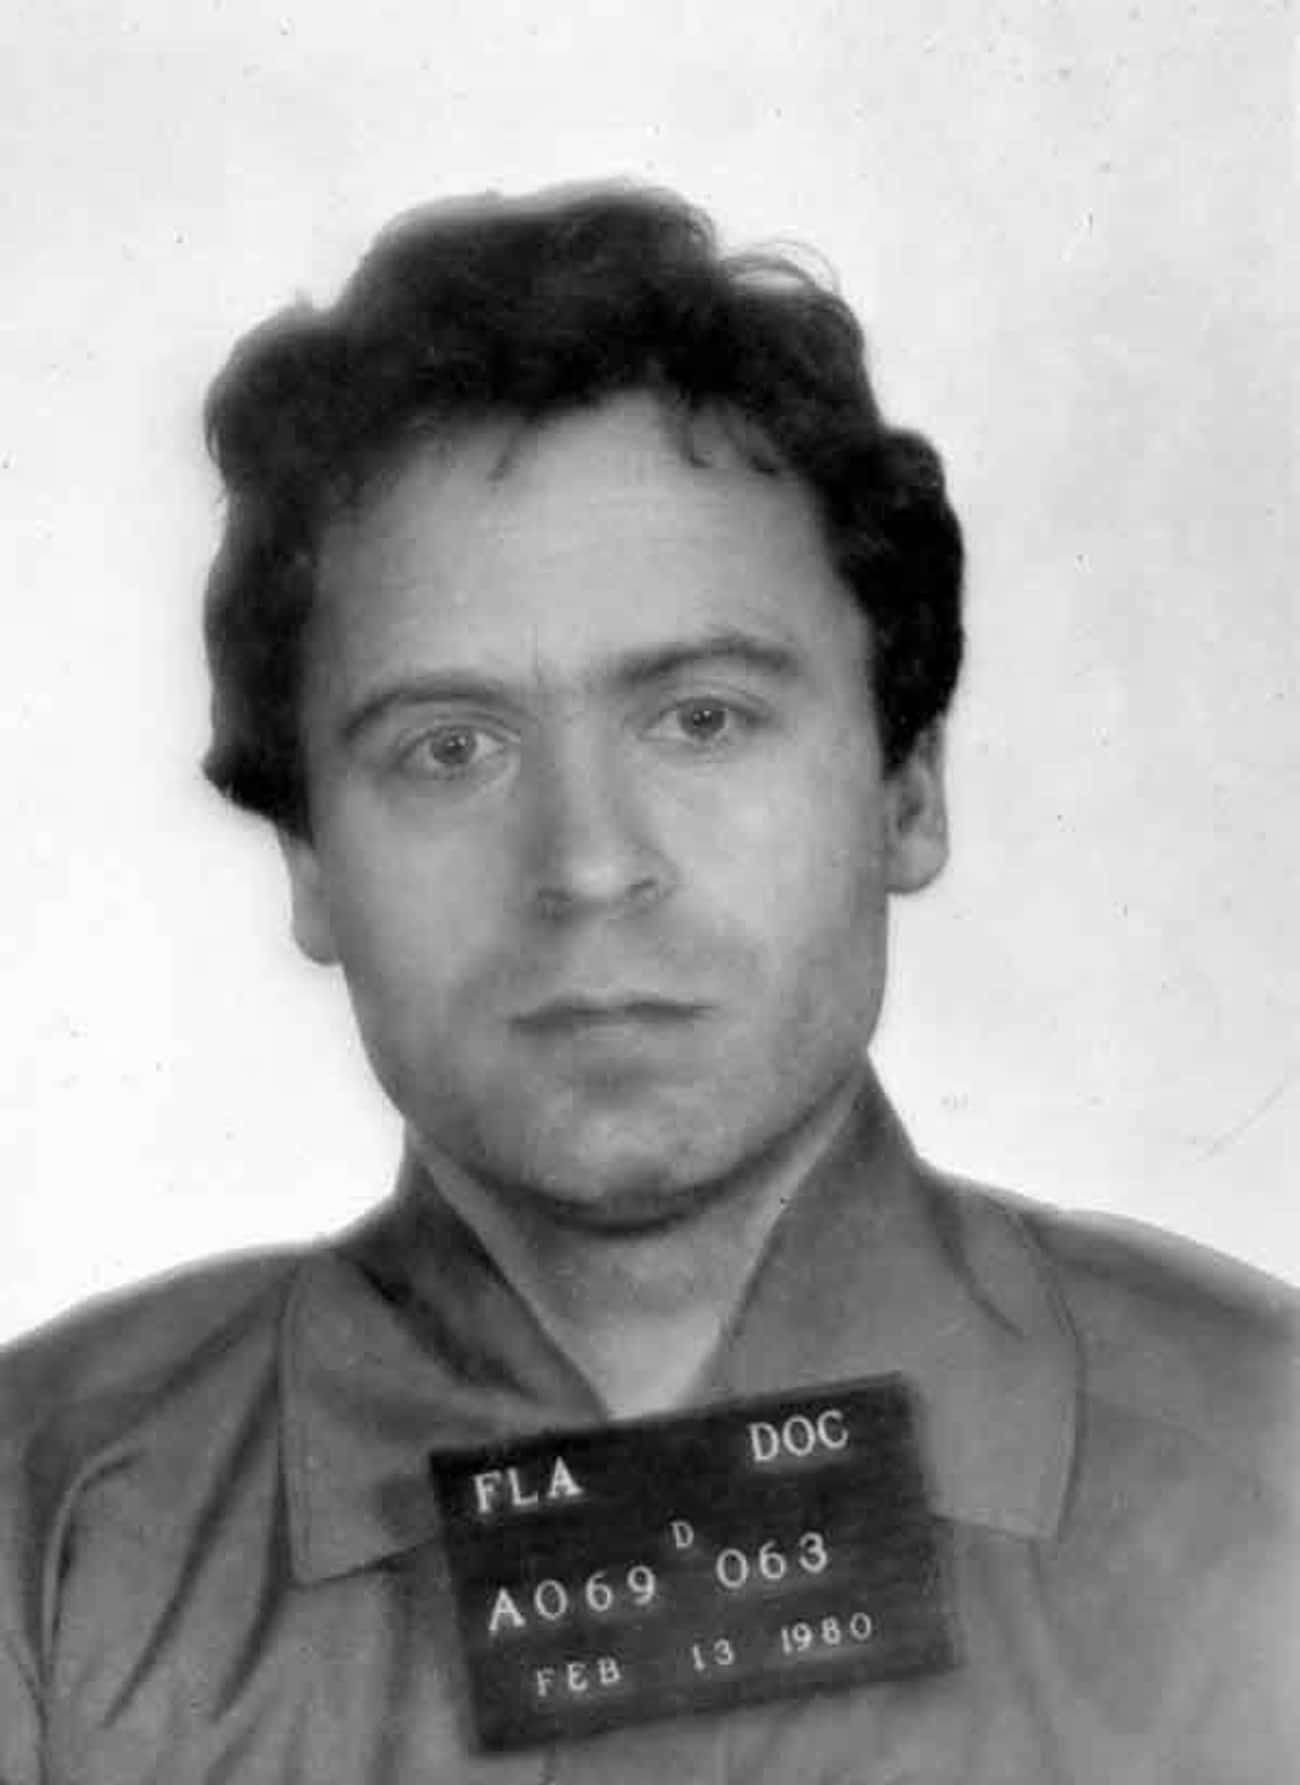 Ted Bundy Worked at a Suicide Hotline